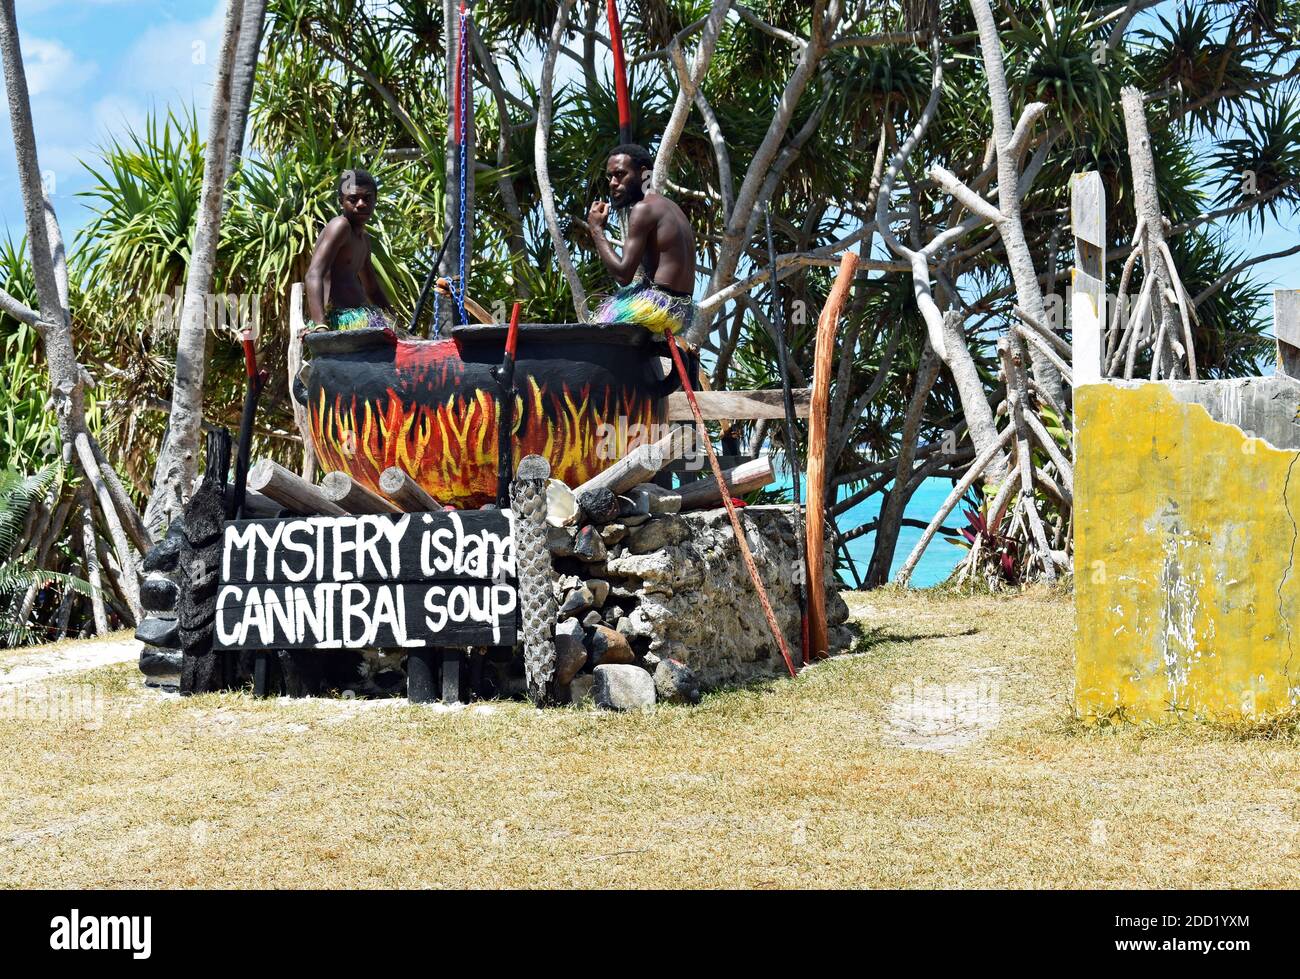 Locals pose for pictures in a huge black pot with painted flames for cannibal soup on Mystery Island, a popular cruise stop in Vanuatu, South Pacific. Stock Photo